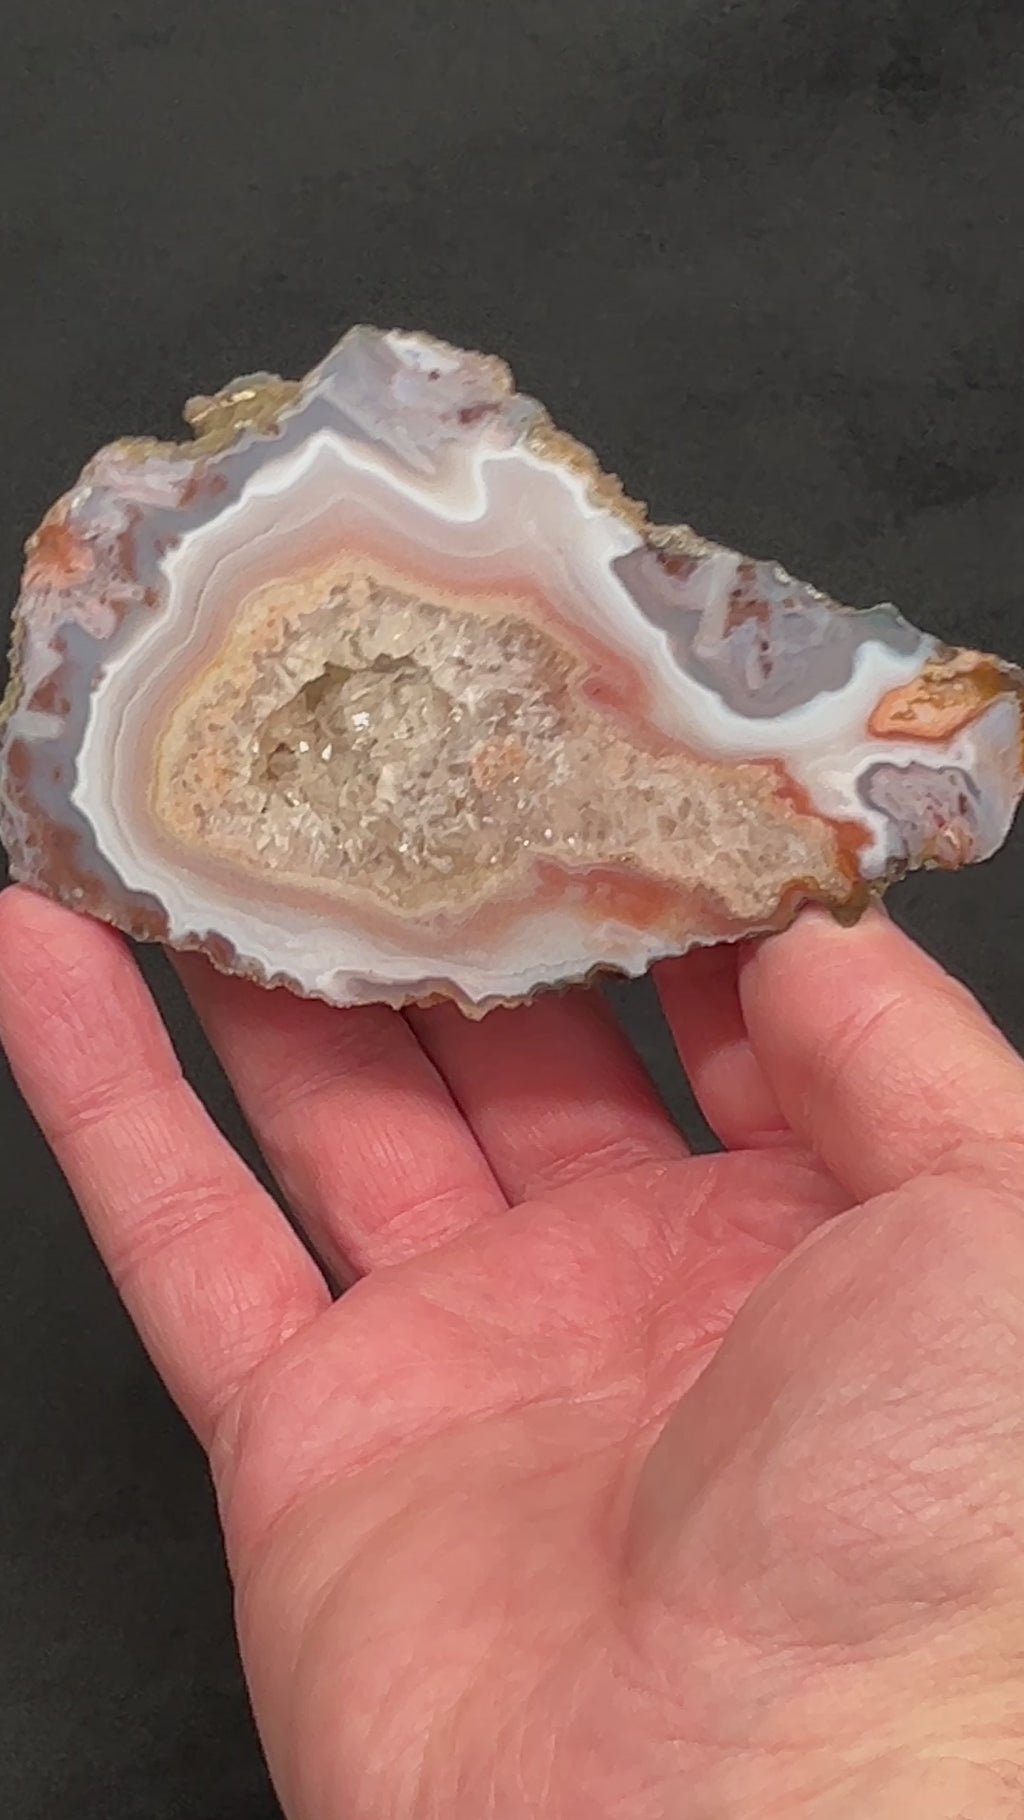 Agate is primarily a microcrystalline quartz var. chalcedony most frequently found within volcanic and metamorphic rocks.  Moroccan Agates like this one often feature many different formations, patterns, structures and an incredible variance of colors.   